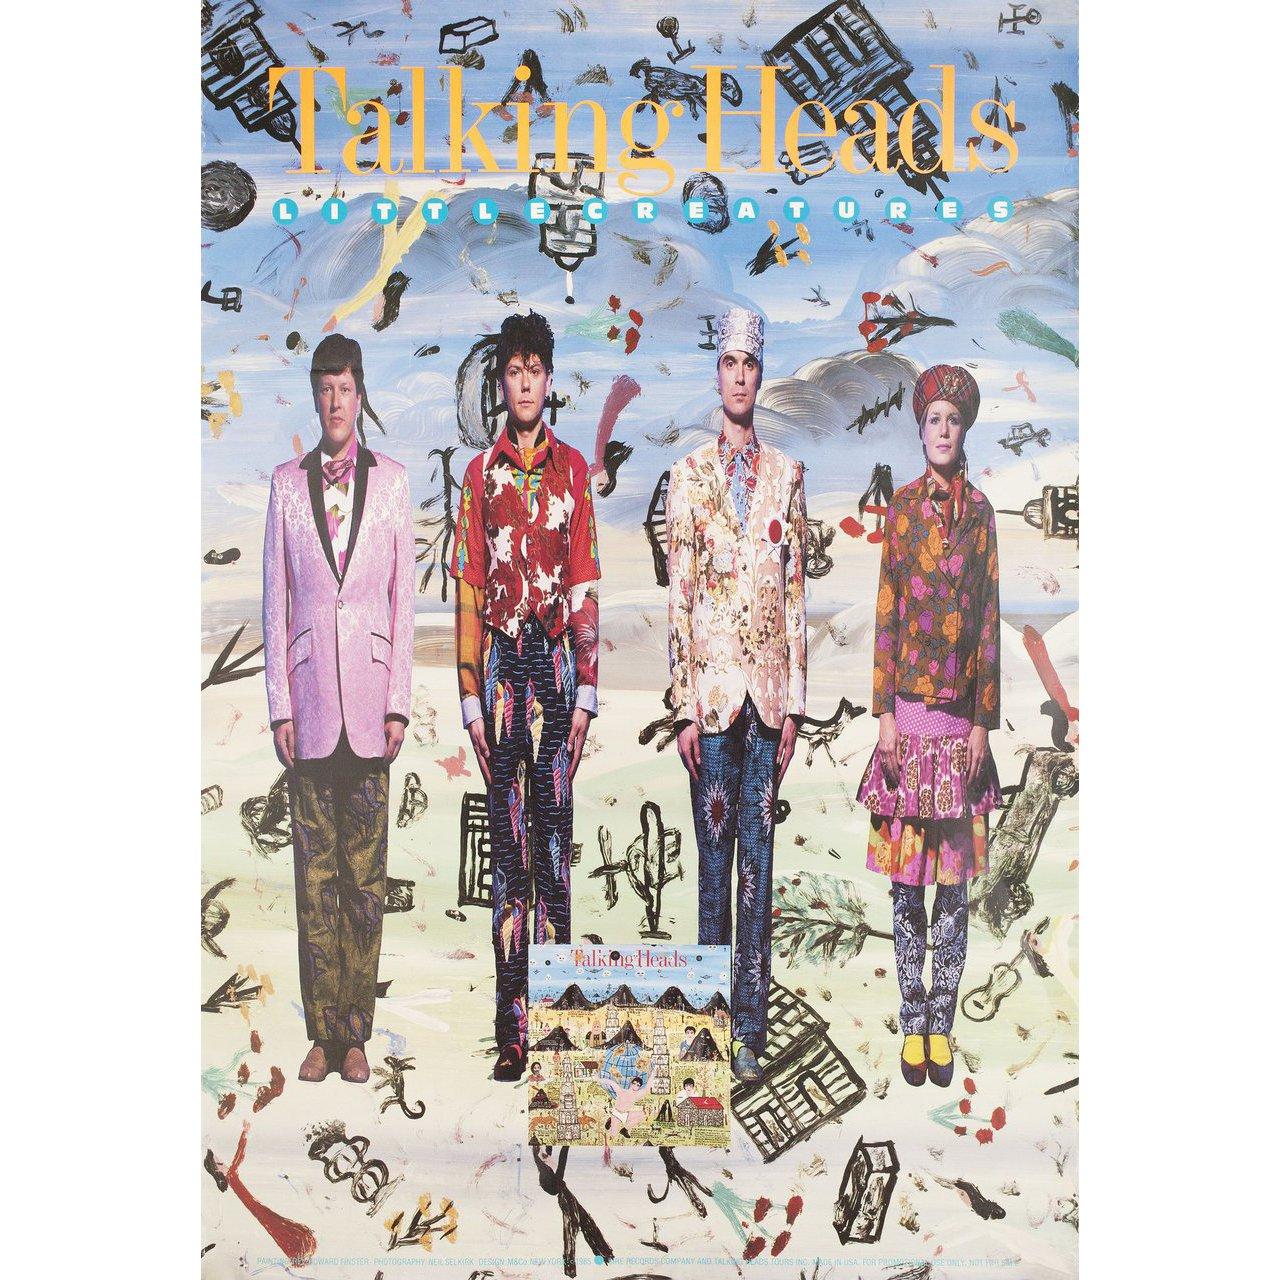 Original 1985 U.S. poster by Howard Finster for Talking Heads: Little Creatures (1985). Very Good-Fine condition, rolled. Please note: the size is stated in inches and the actual size can vary by an inch or more.